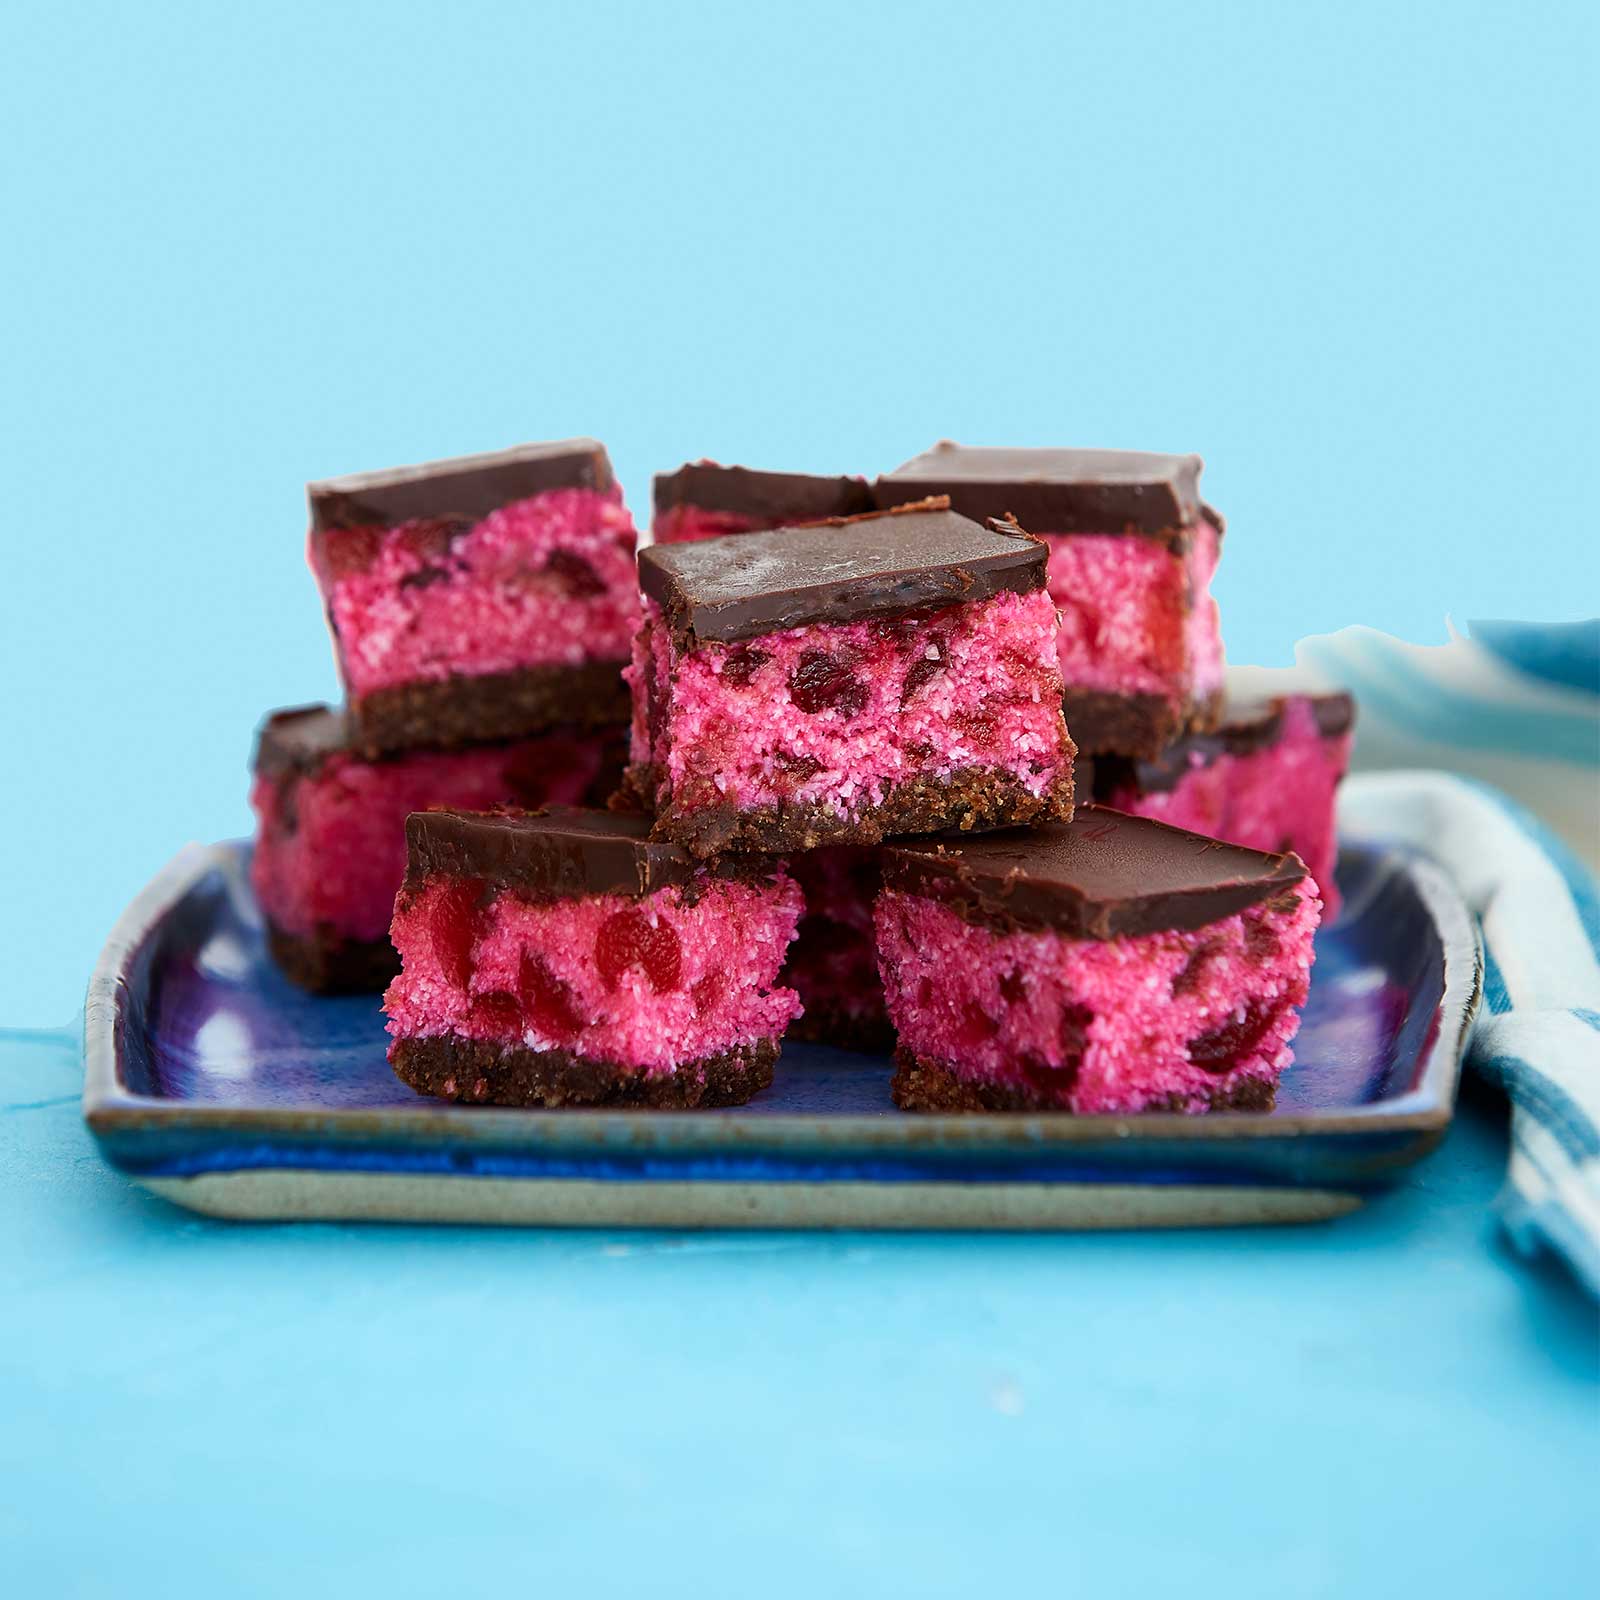 Gluten- and dairy-free cherry ripe slice cut into squared and arranged on a square blue plate.